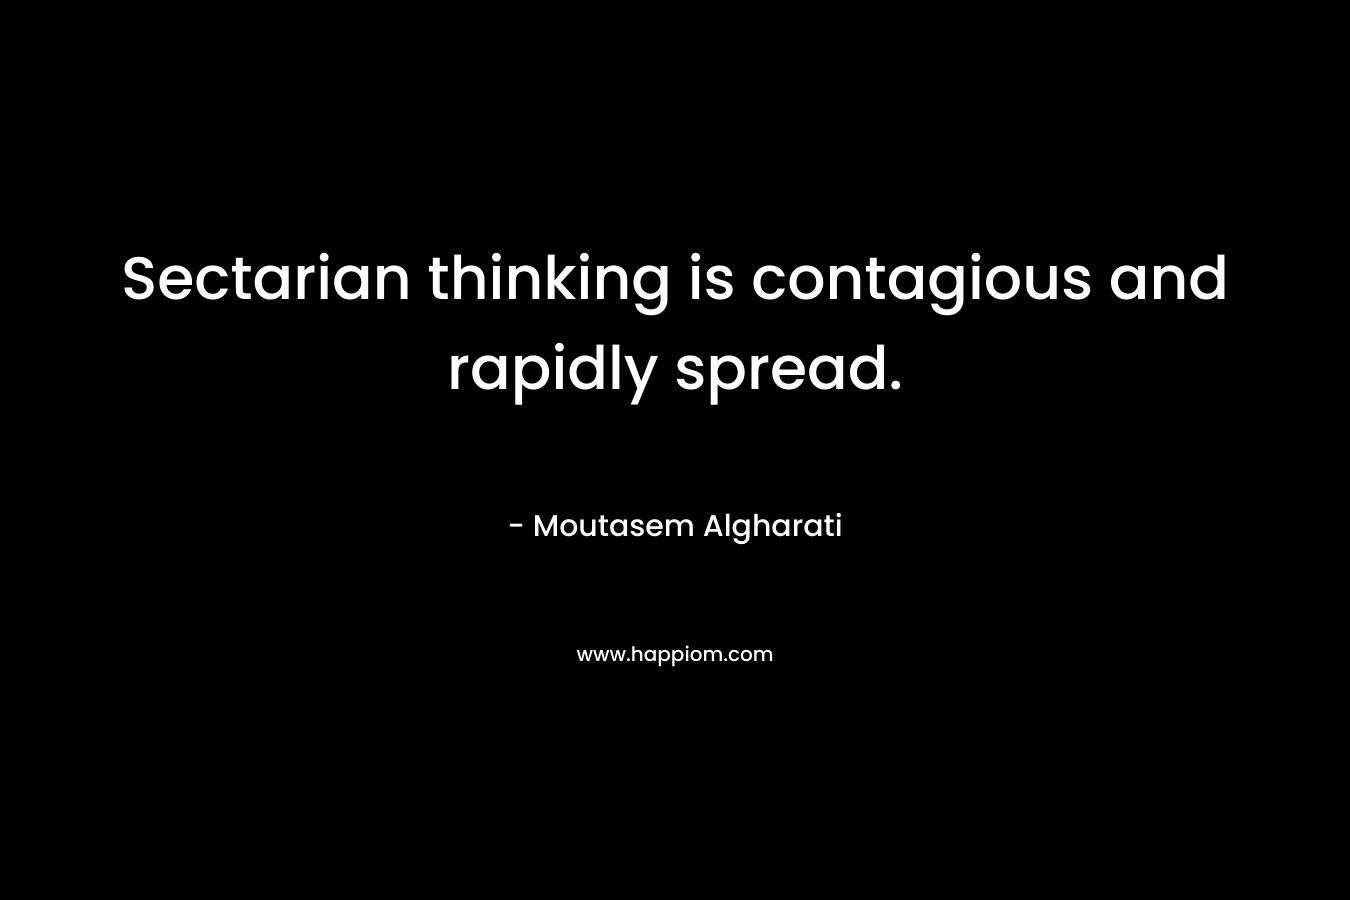 Sectarian thinking is contagious and rapidly spread.